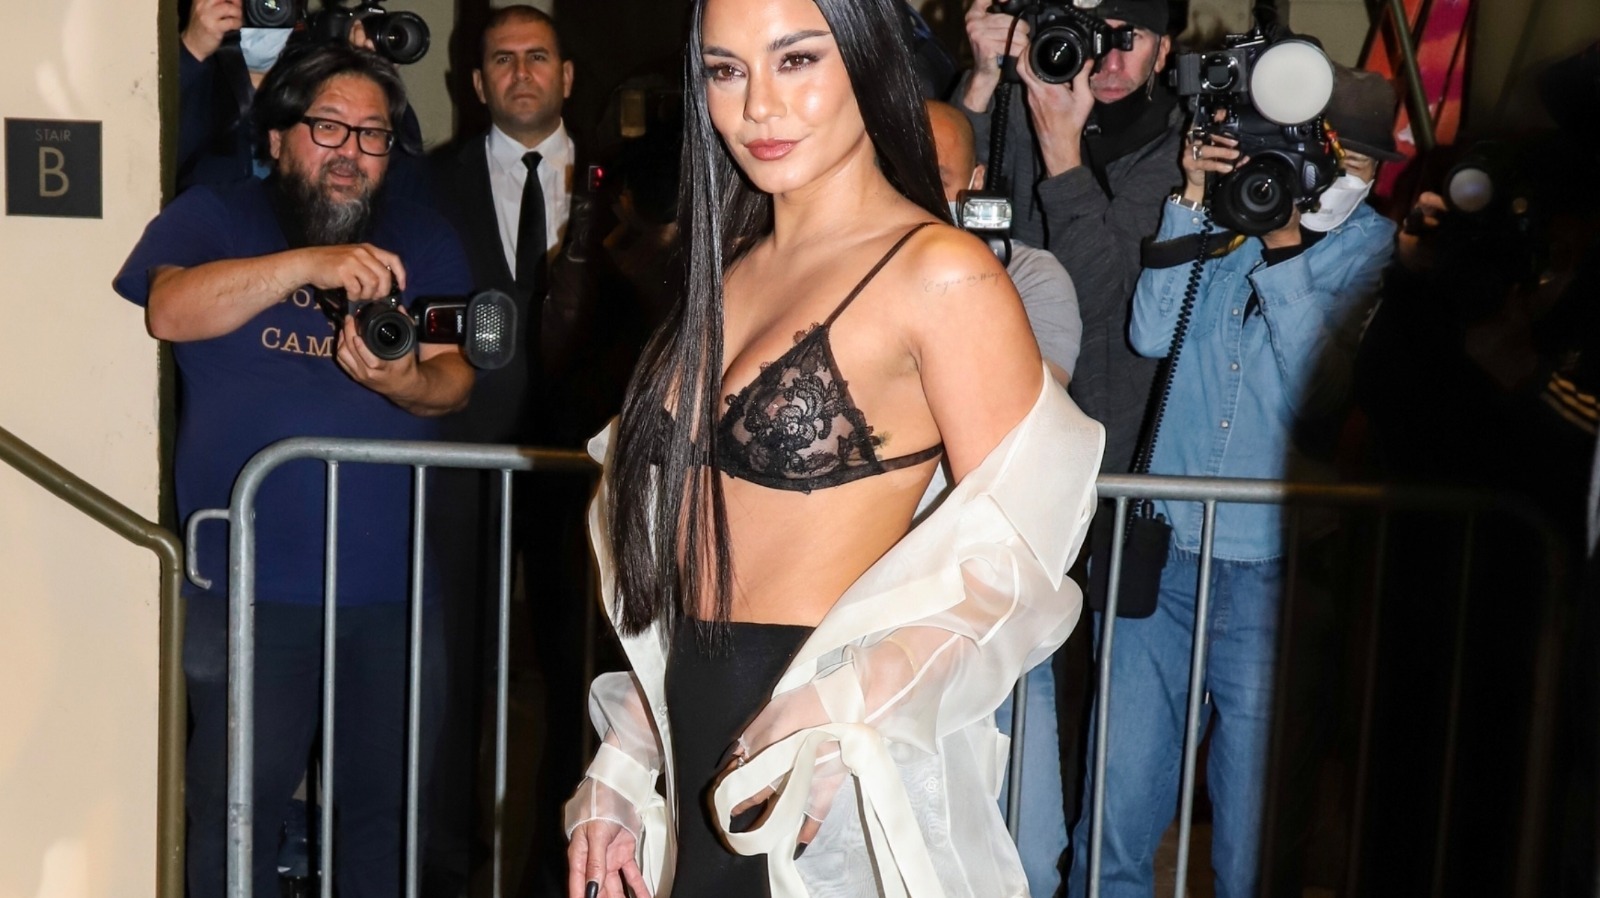 Get The Look On A Budget: Vanessa Hudgens' Lace Bra Top And Sheer